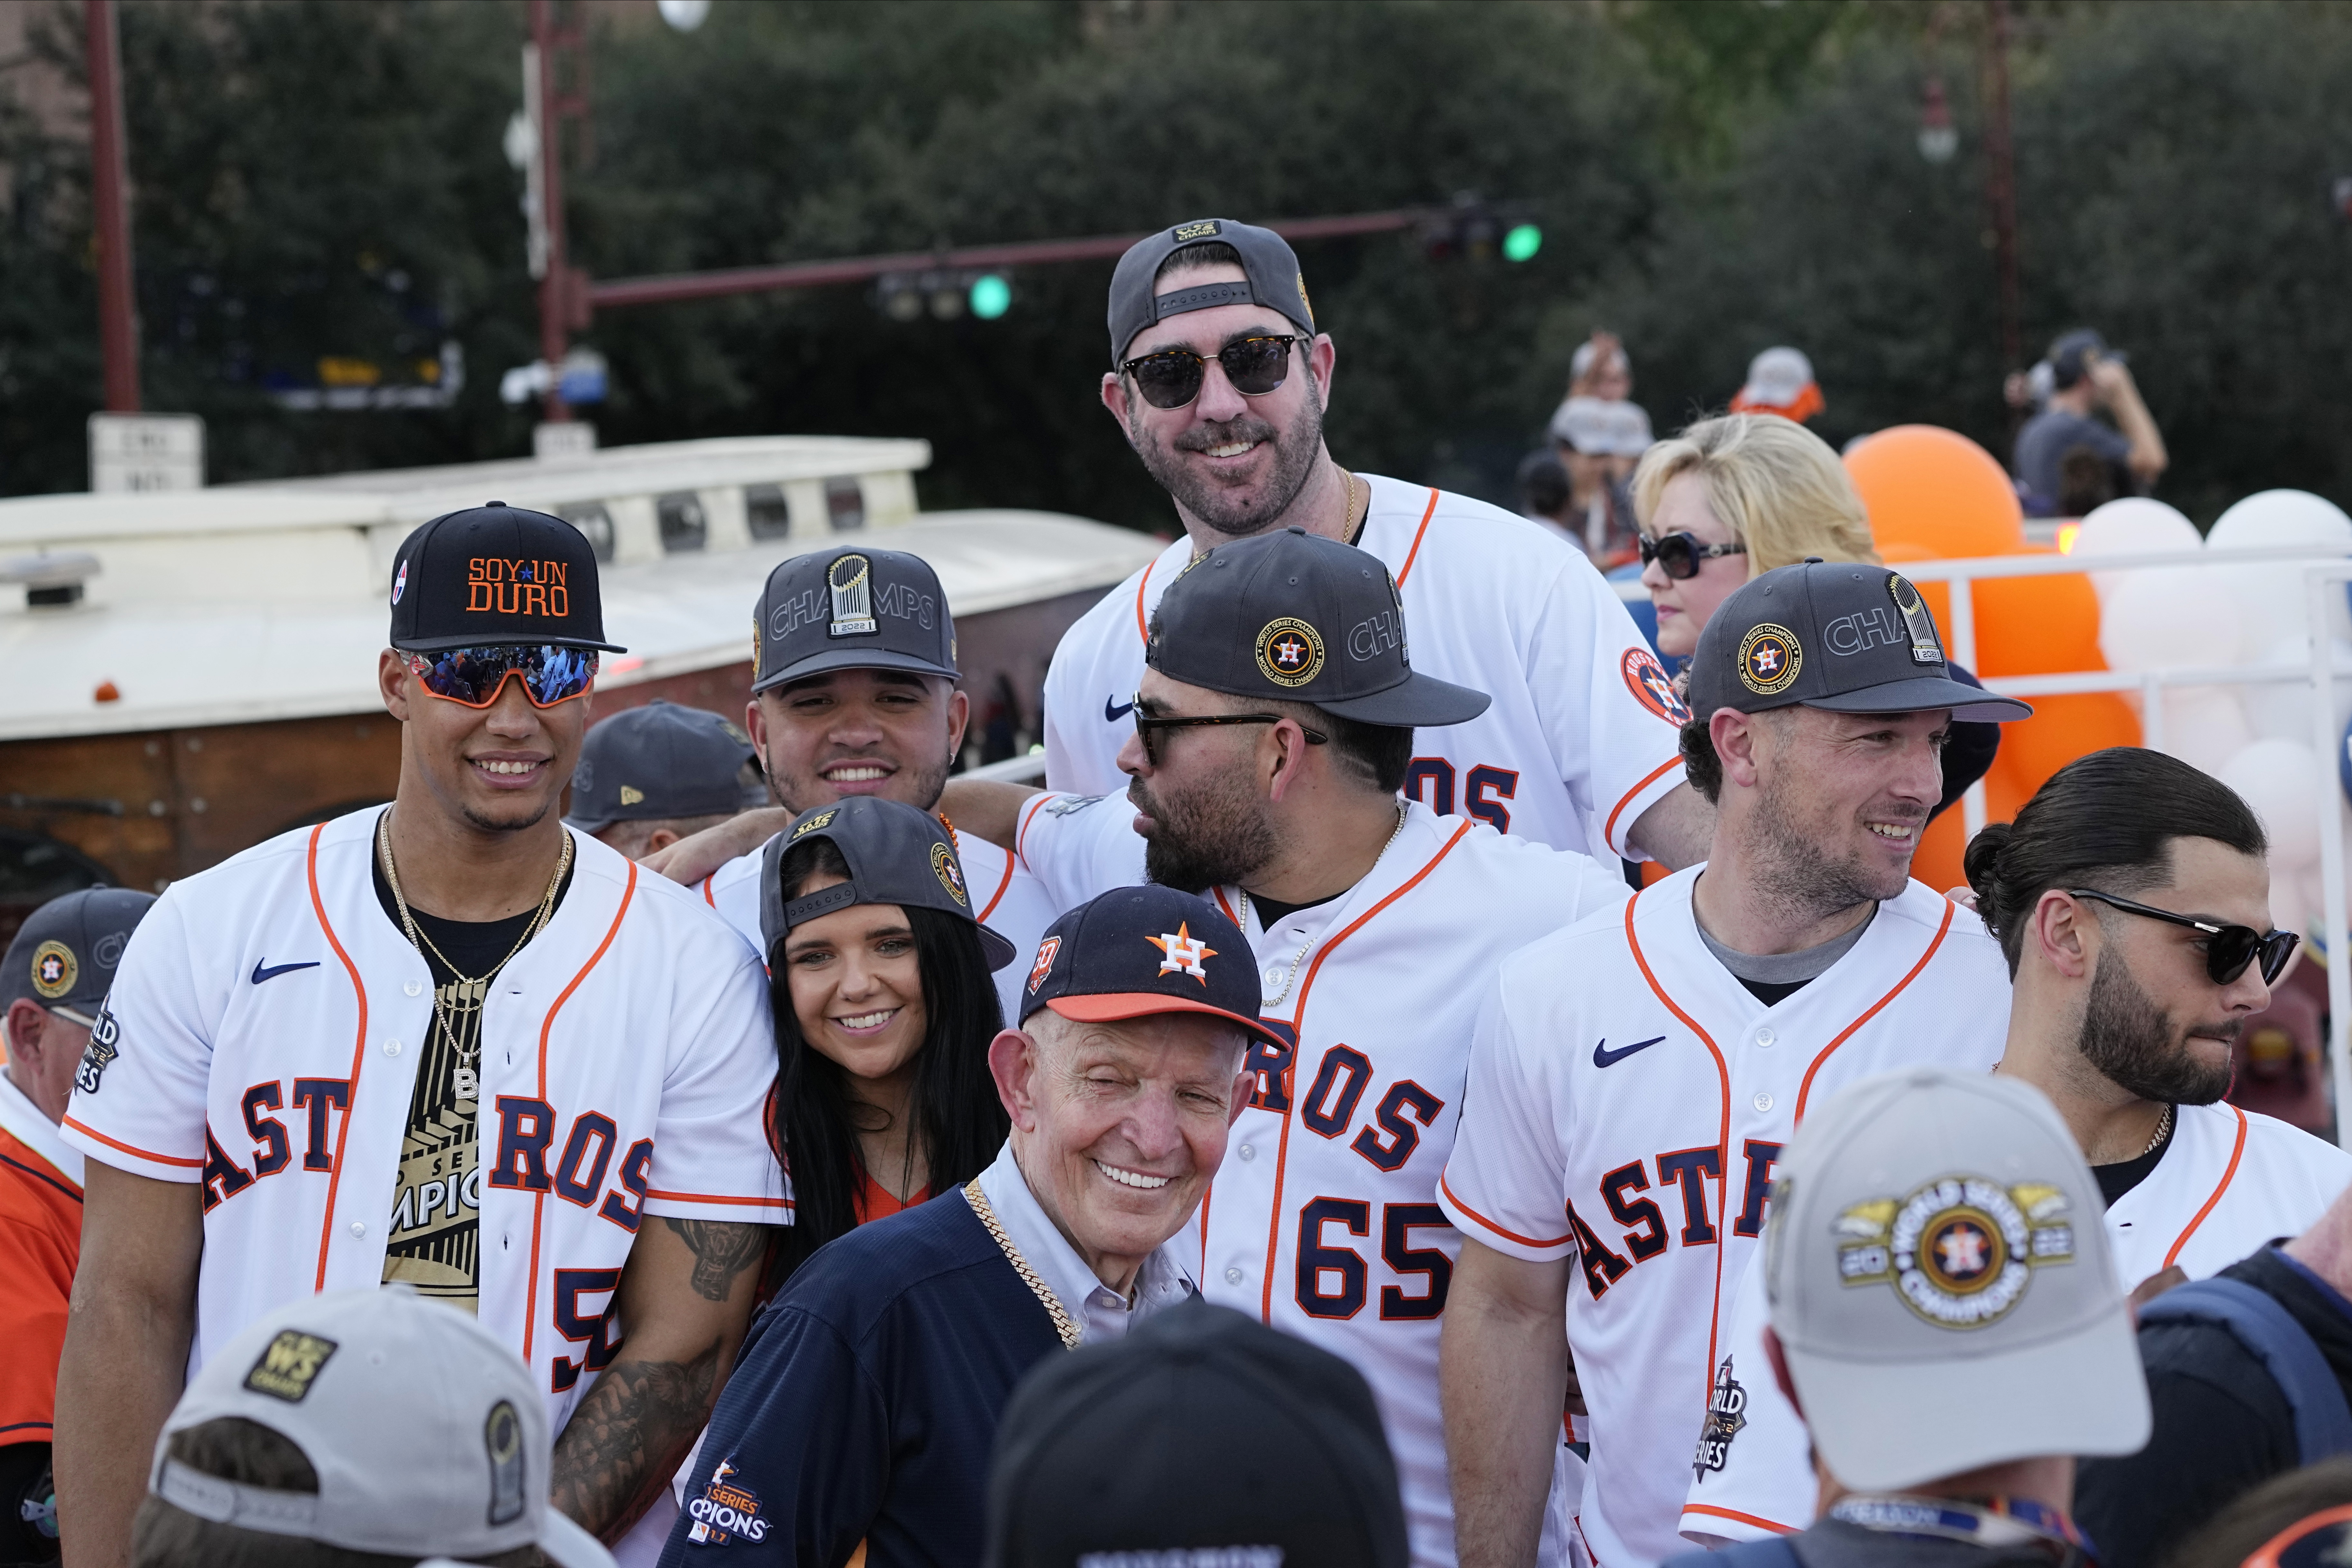 astros players 2022